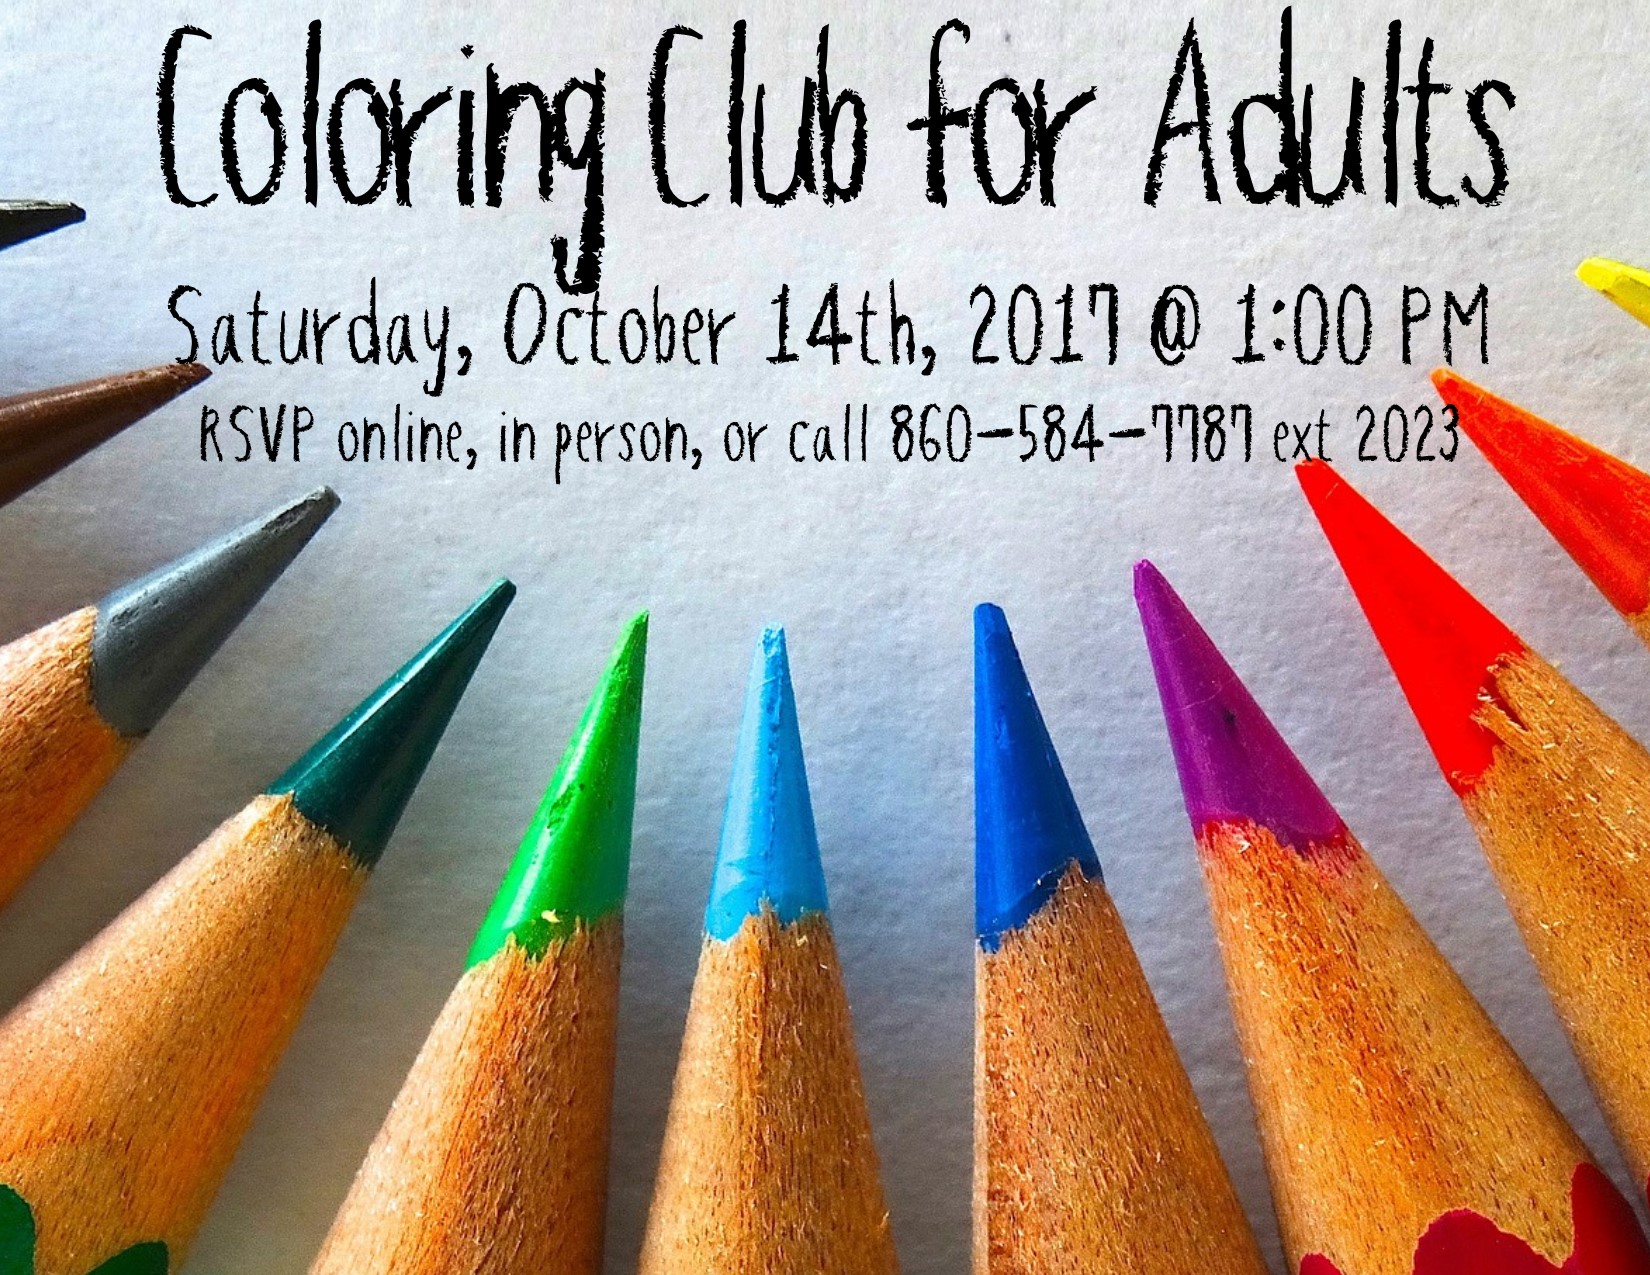 Coloring Club for Adults - Bristol Public Library